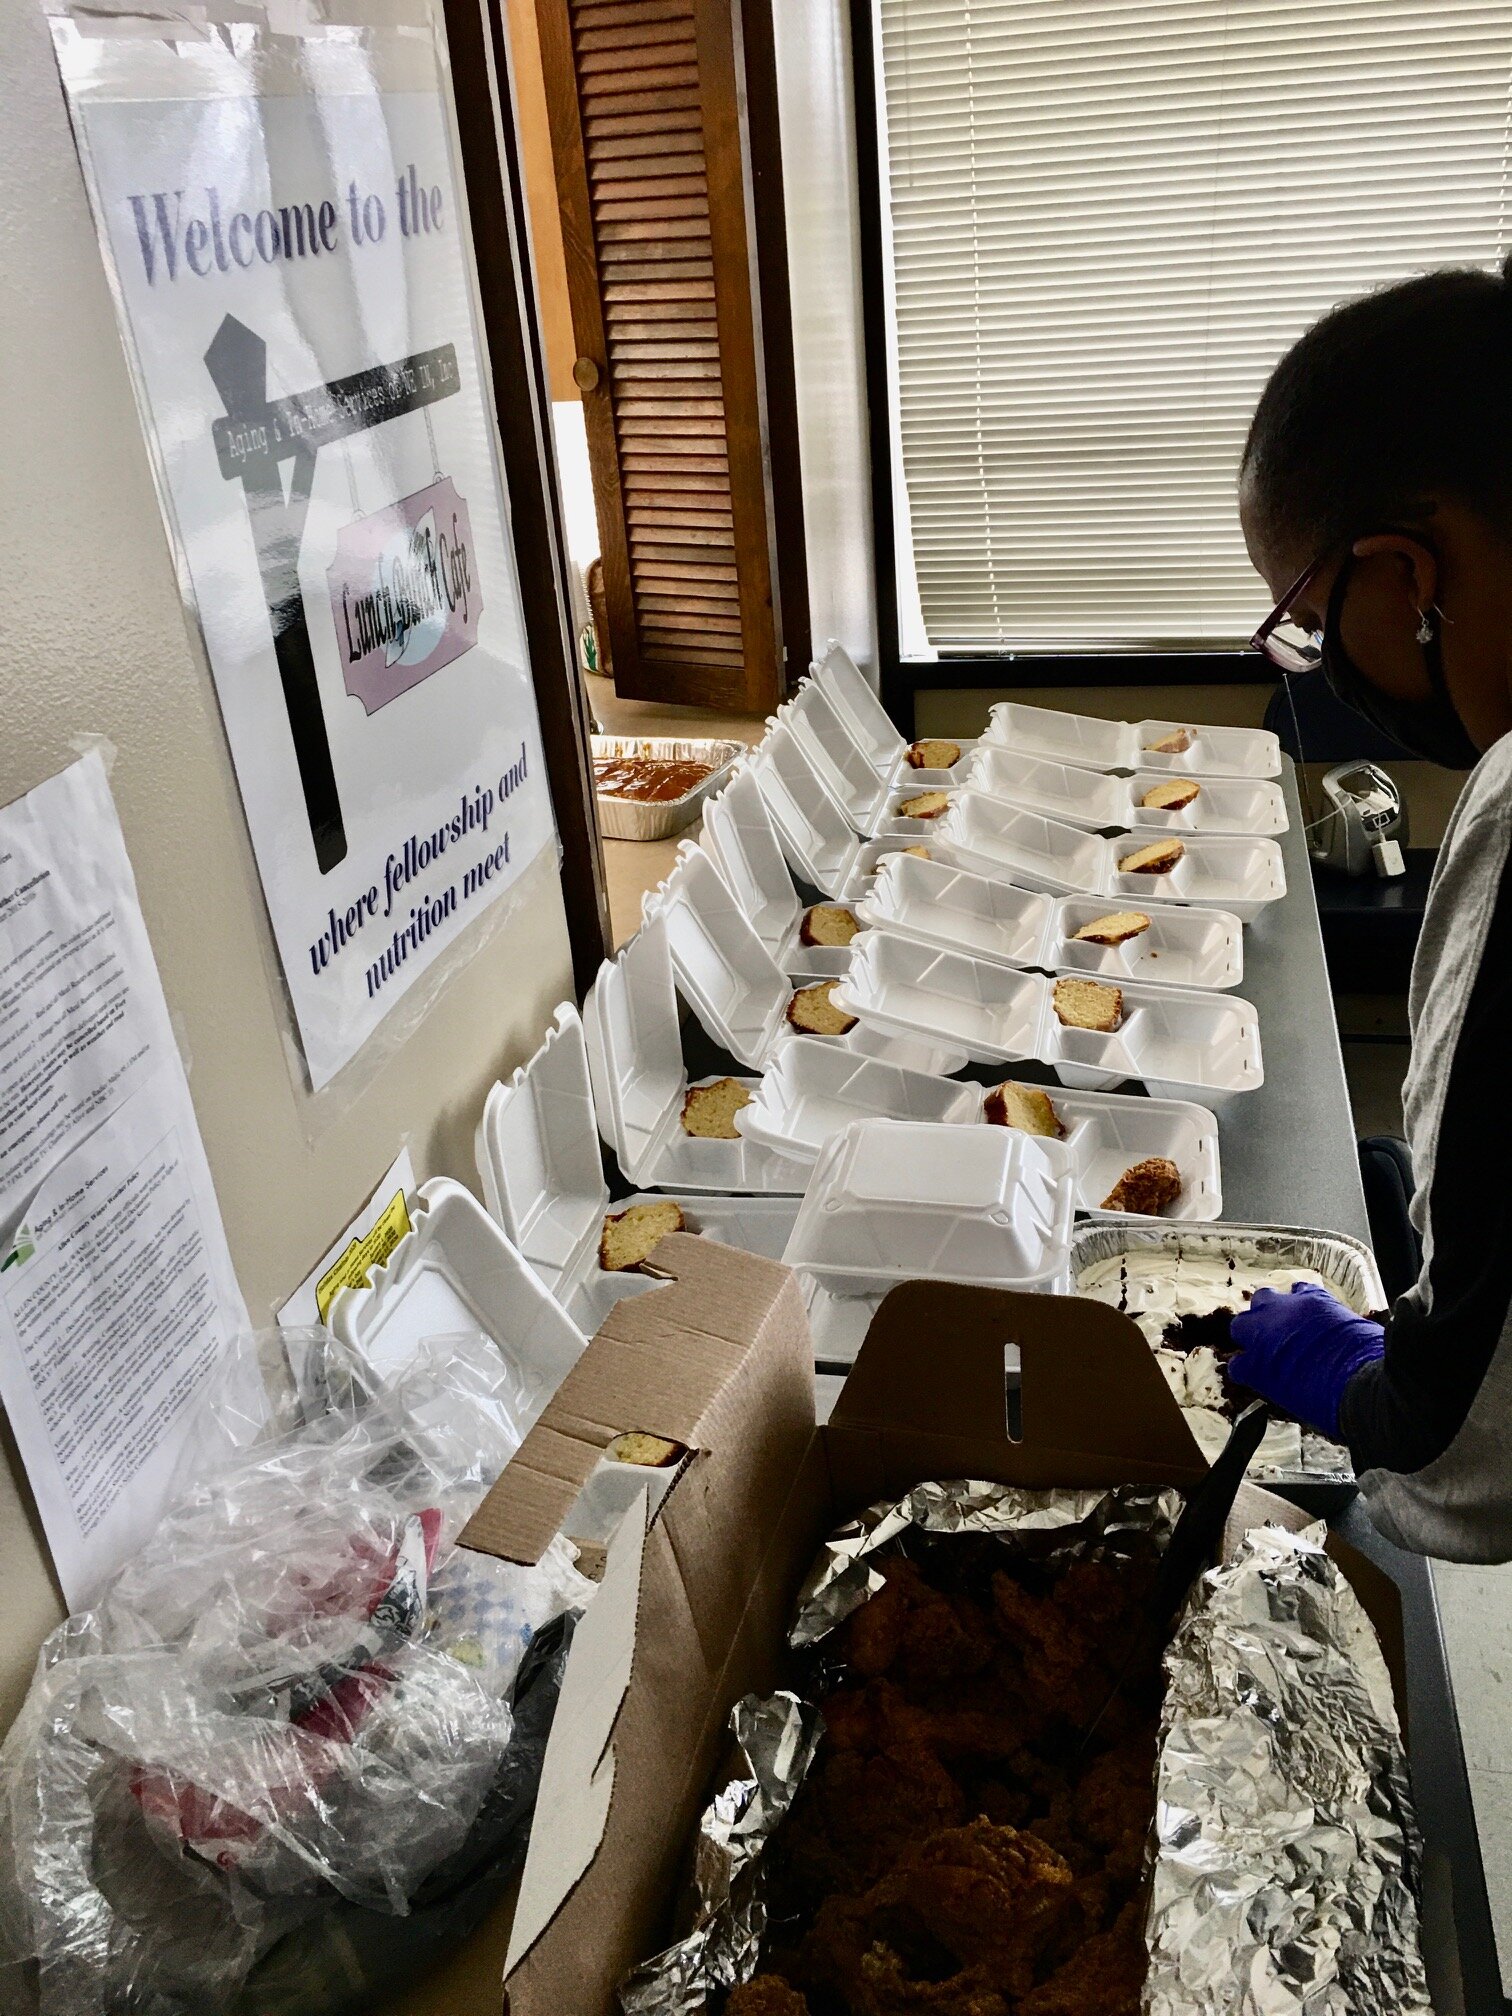 Since COVID made gathering hazardous, Tall Oaks tenant leaders have adapted and made sure their neighbors could get their home-cooked meals by taking pre-orders and delivering them in individual containers.